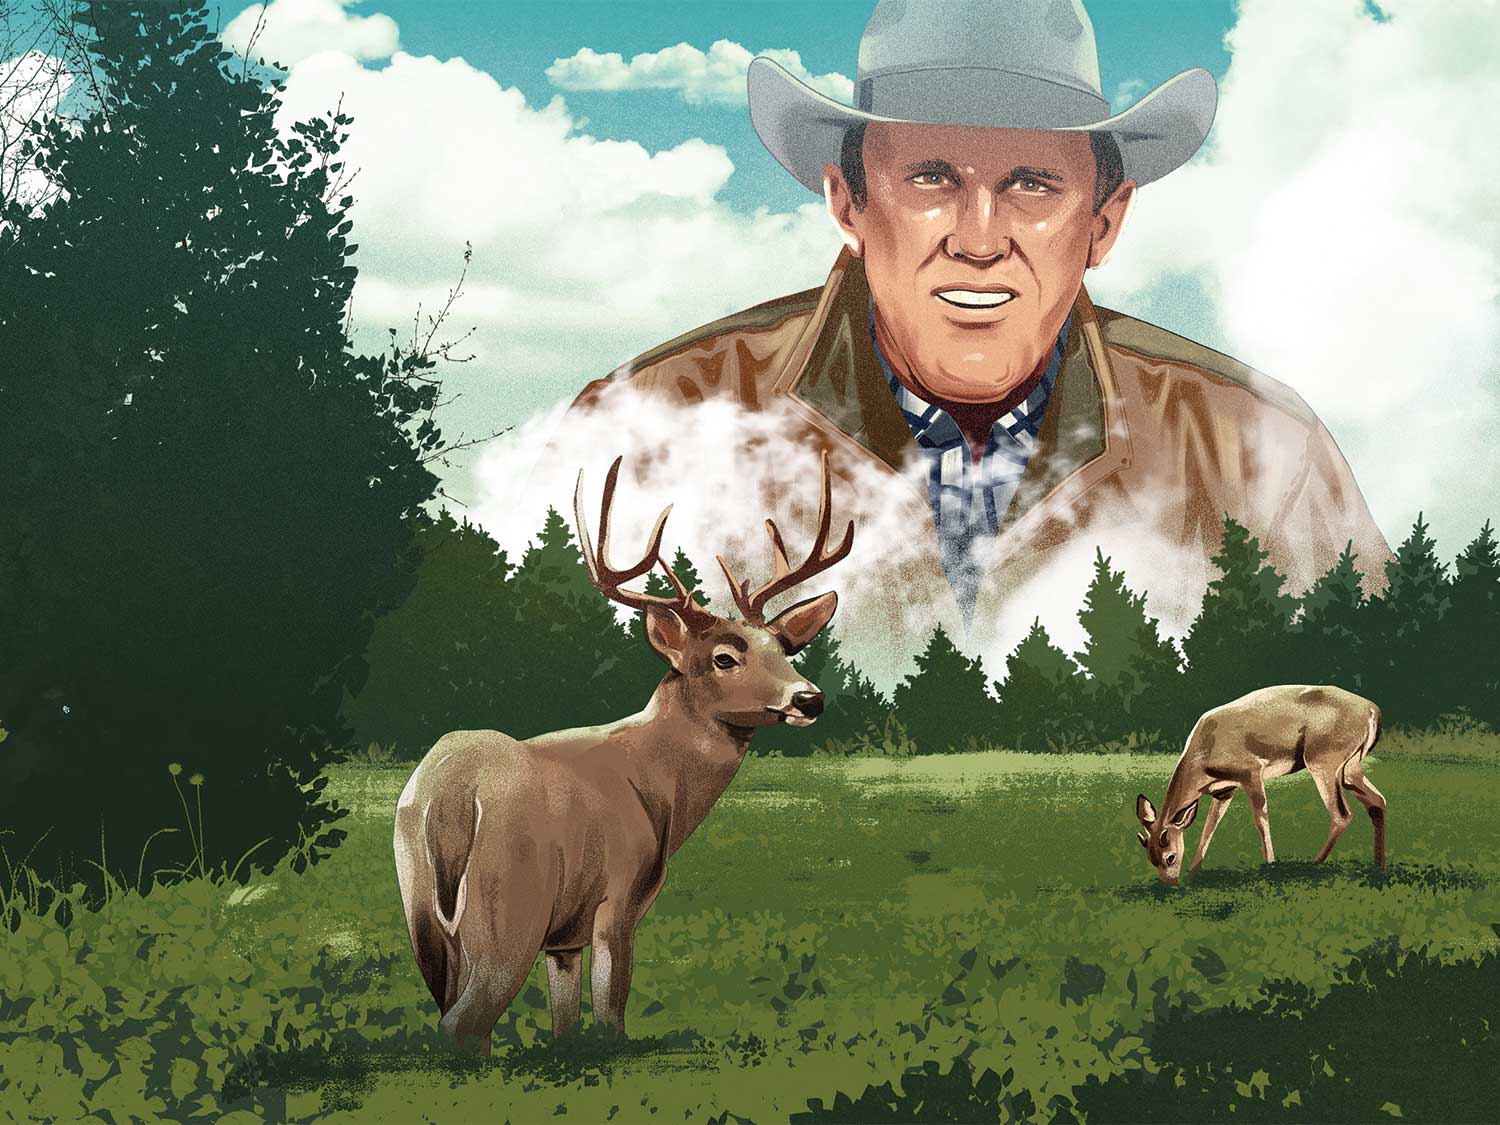 Illustration of a man overlooking a field of deer.